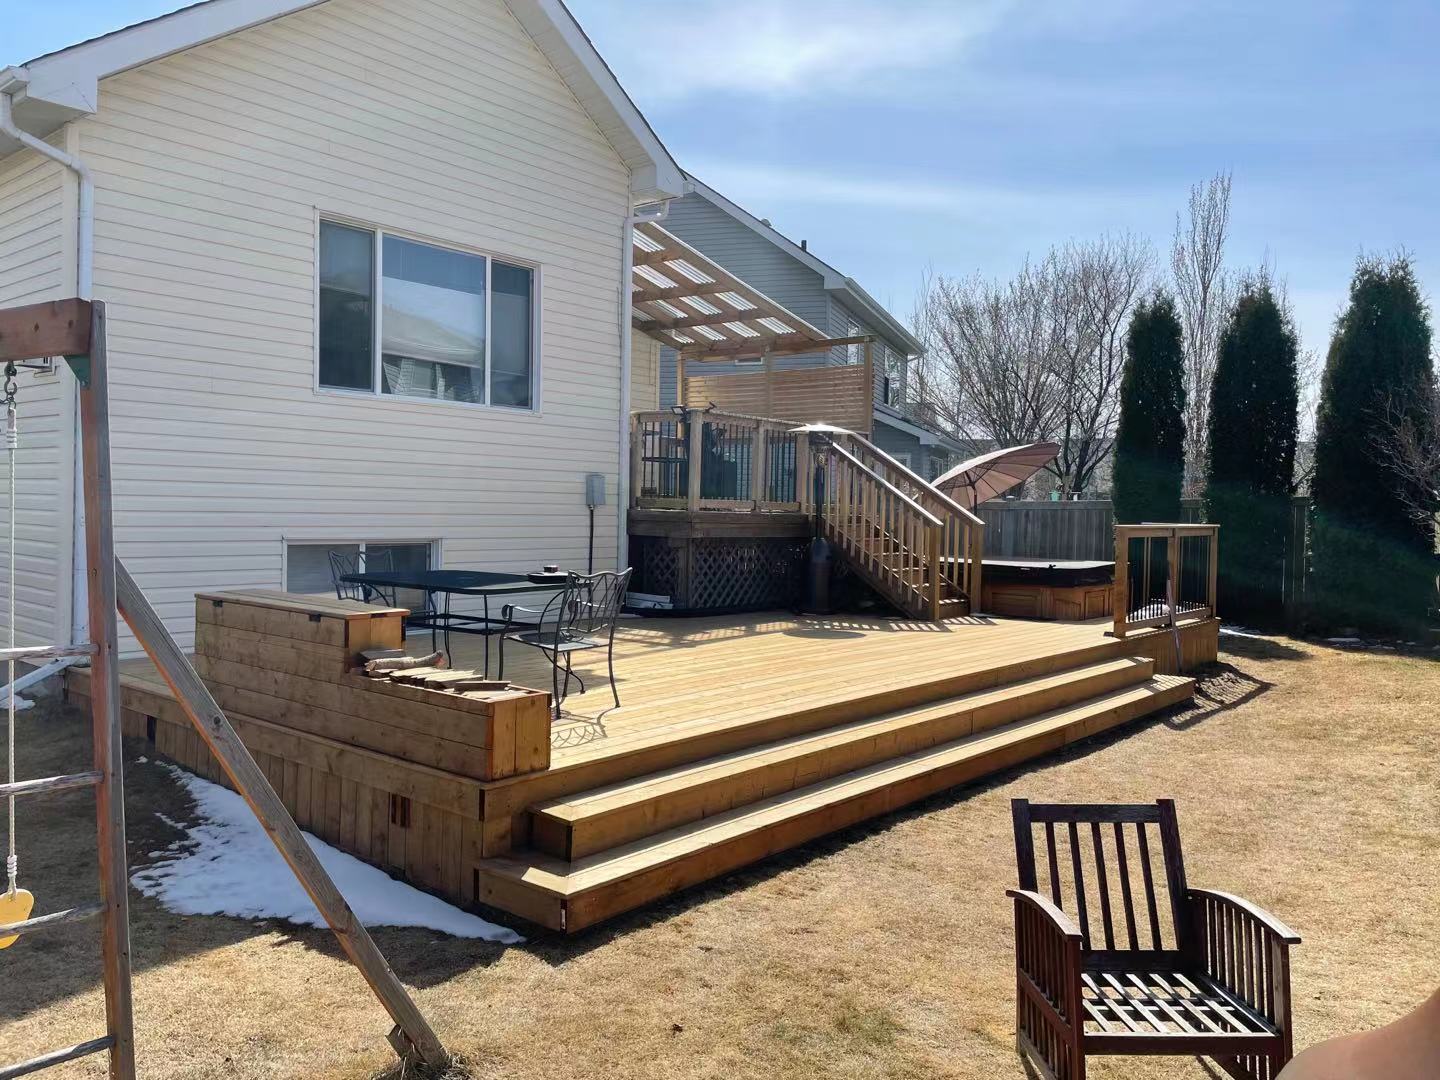 a newly constructed wood deck in the backyard